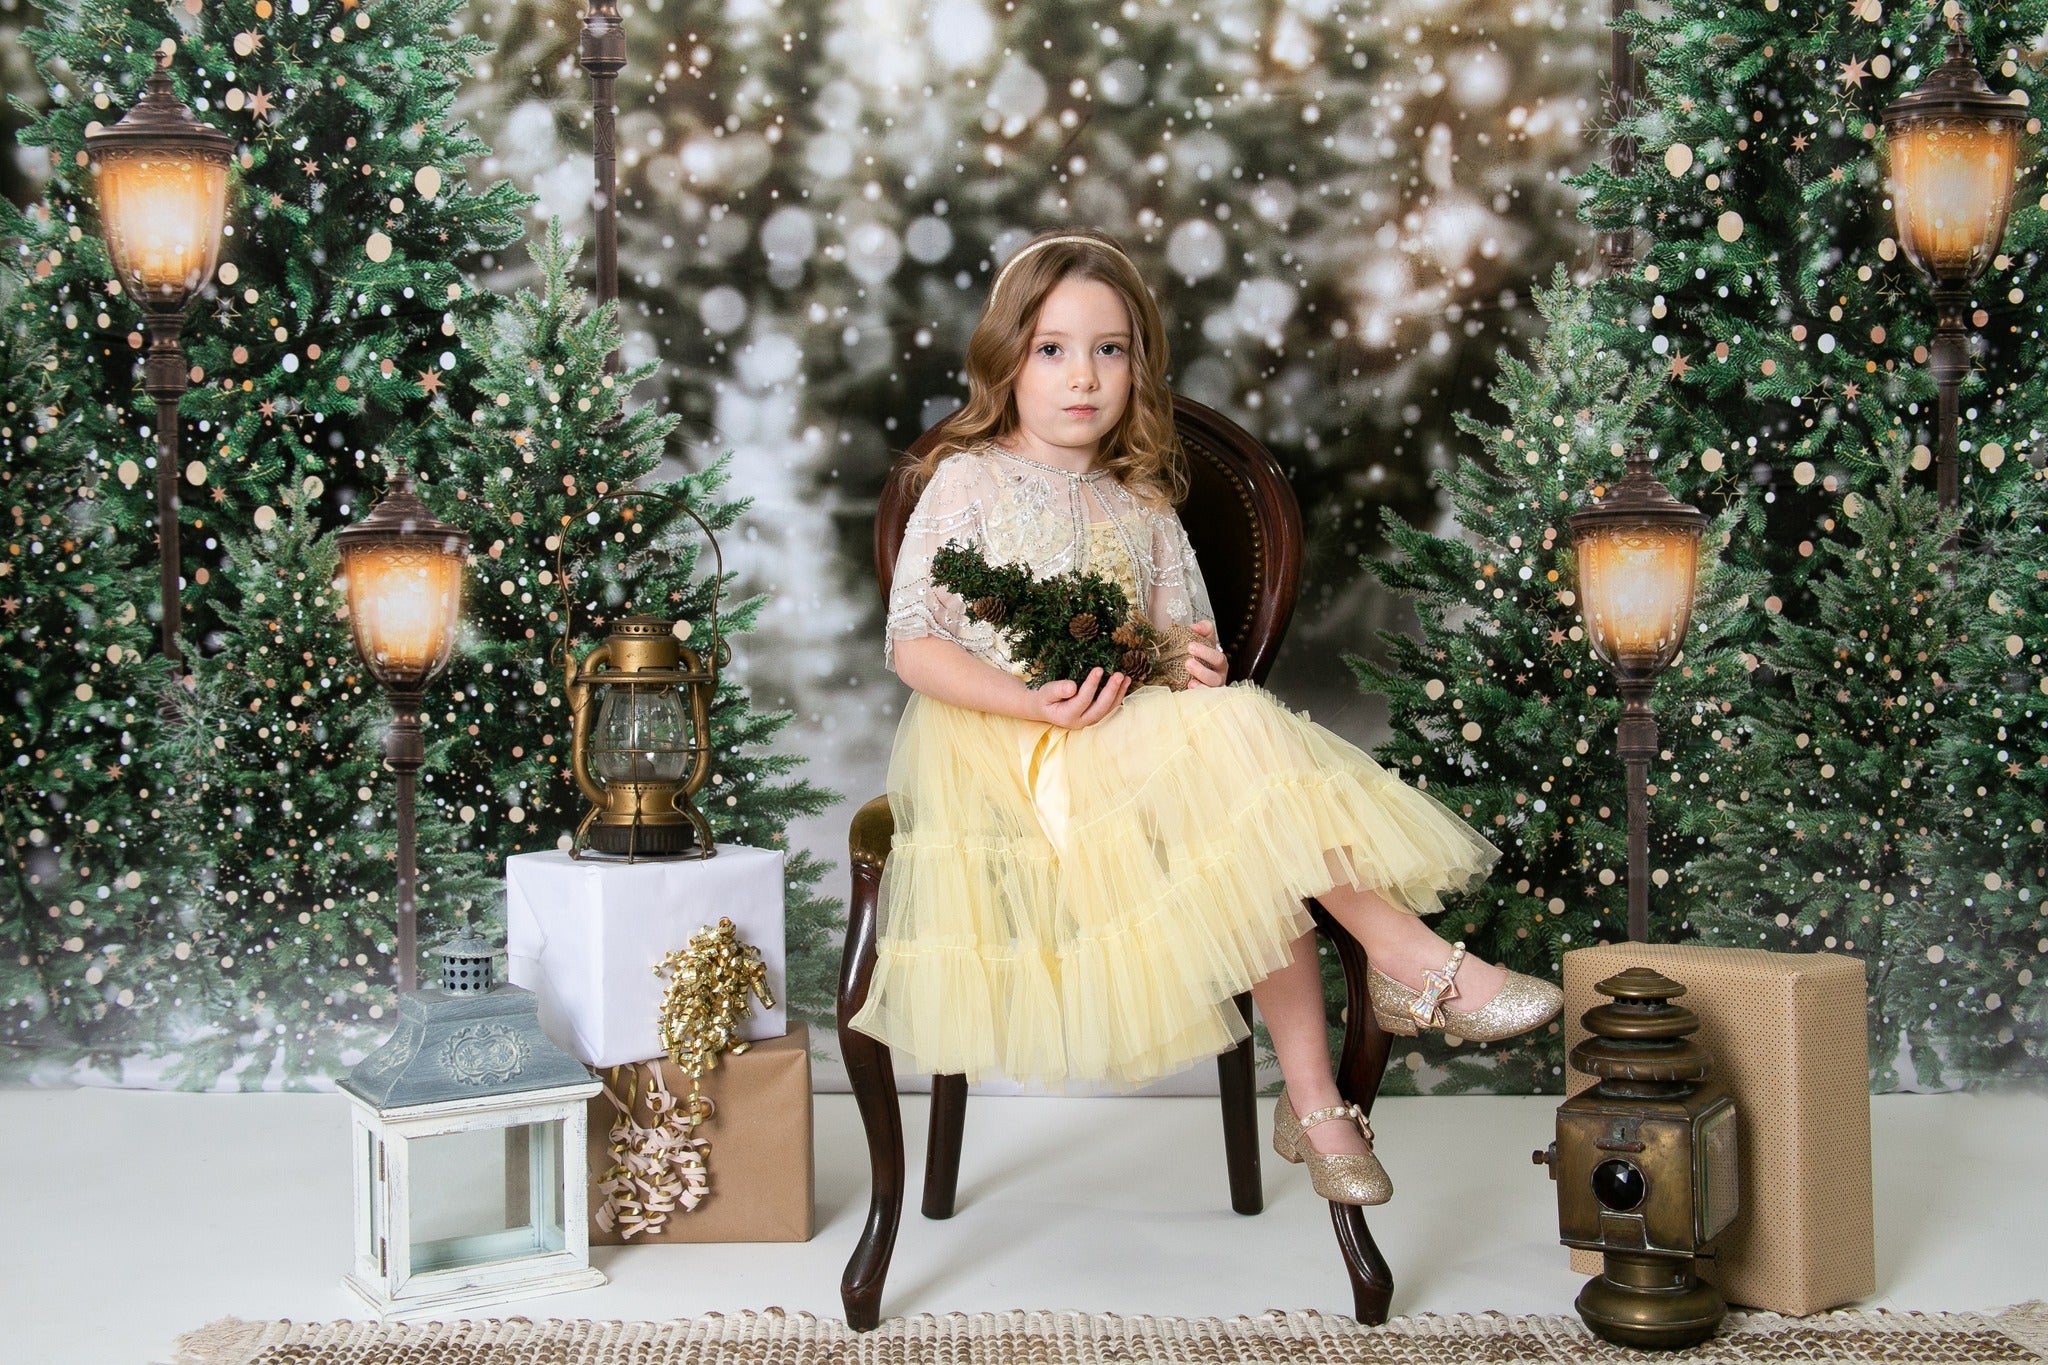 RTS Kate Christmas Snow Forest Lights Backdrop for Photography